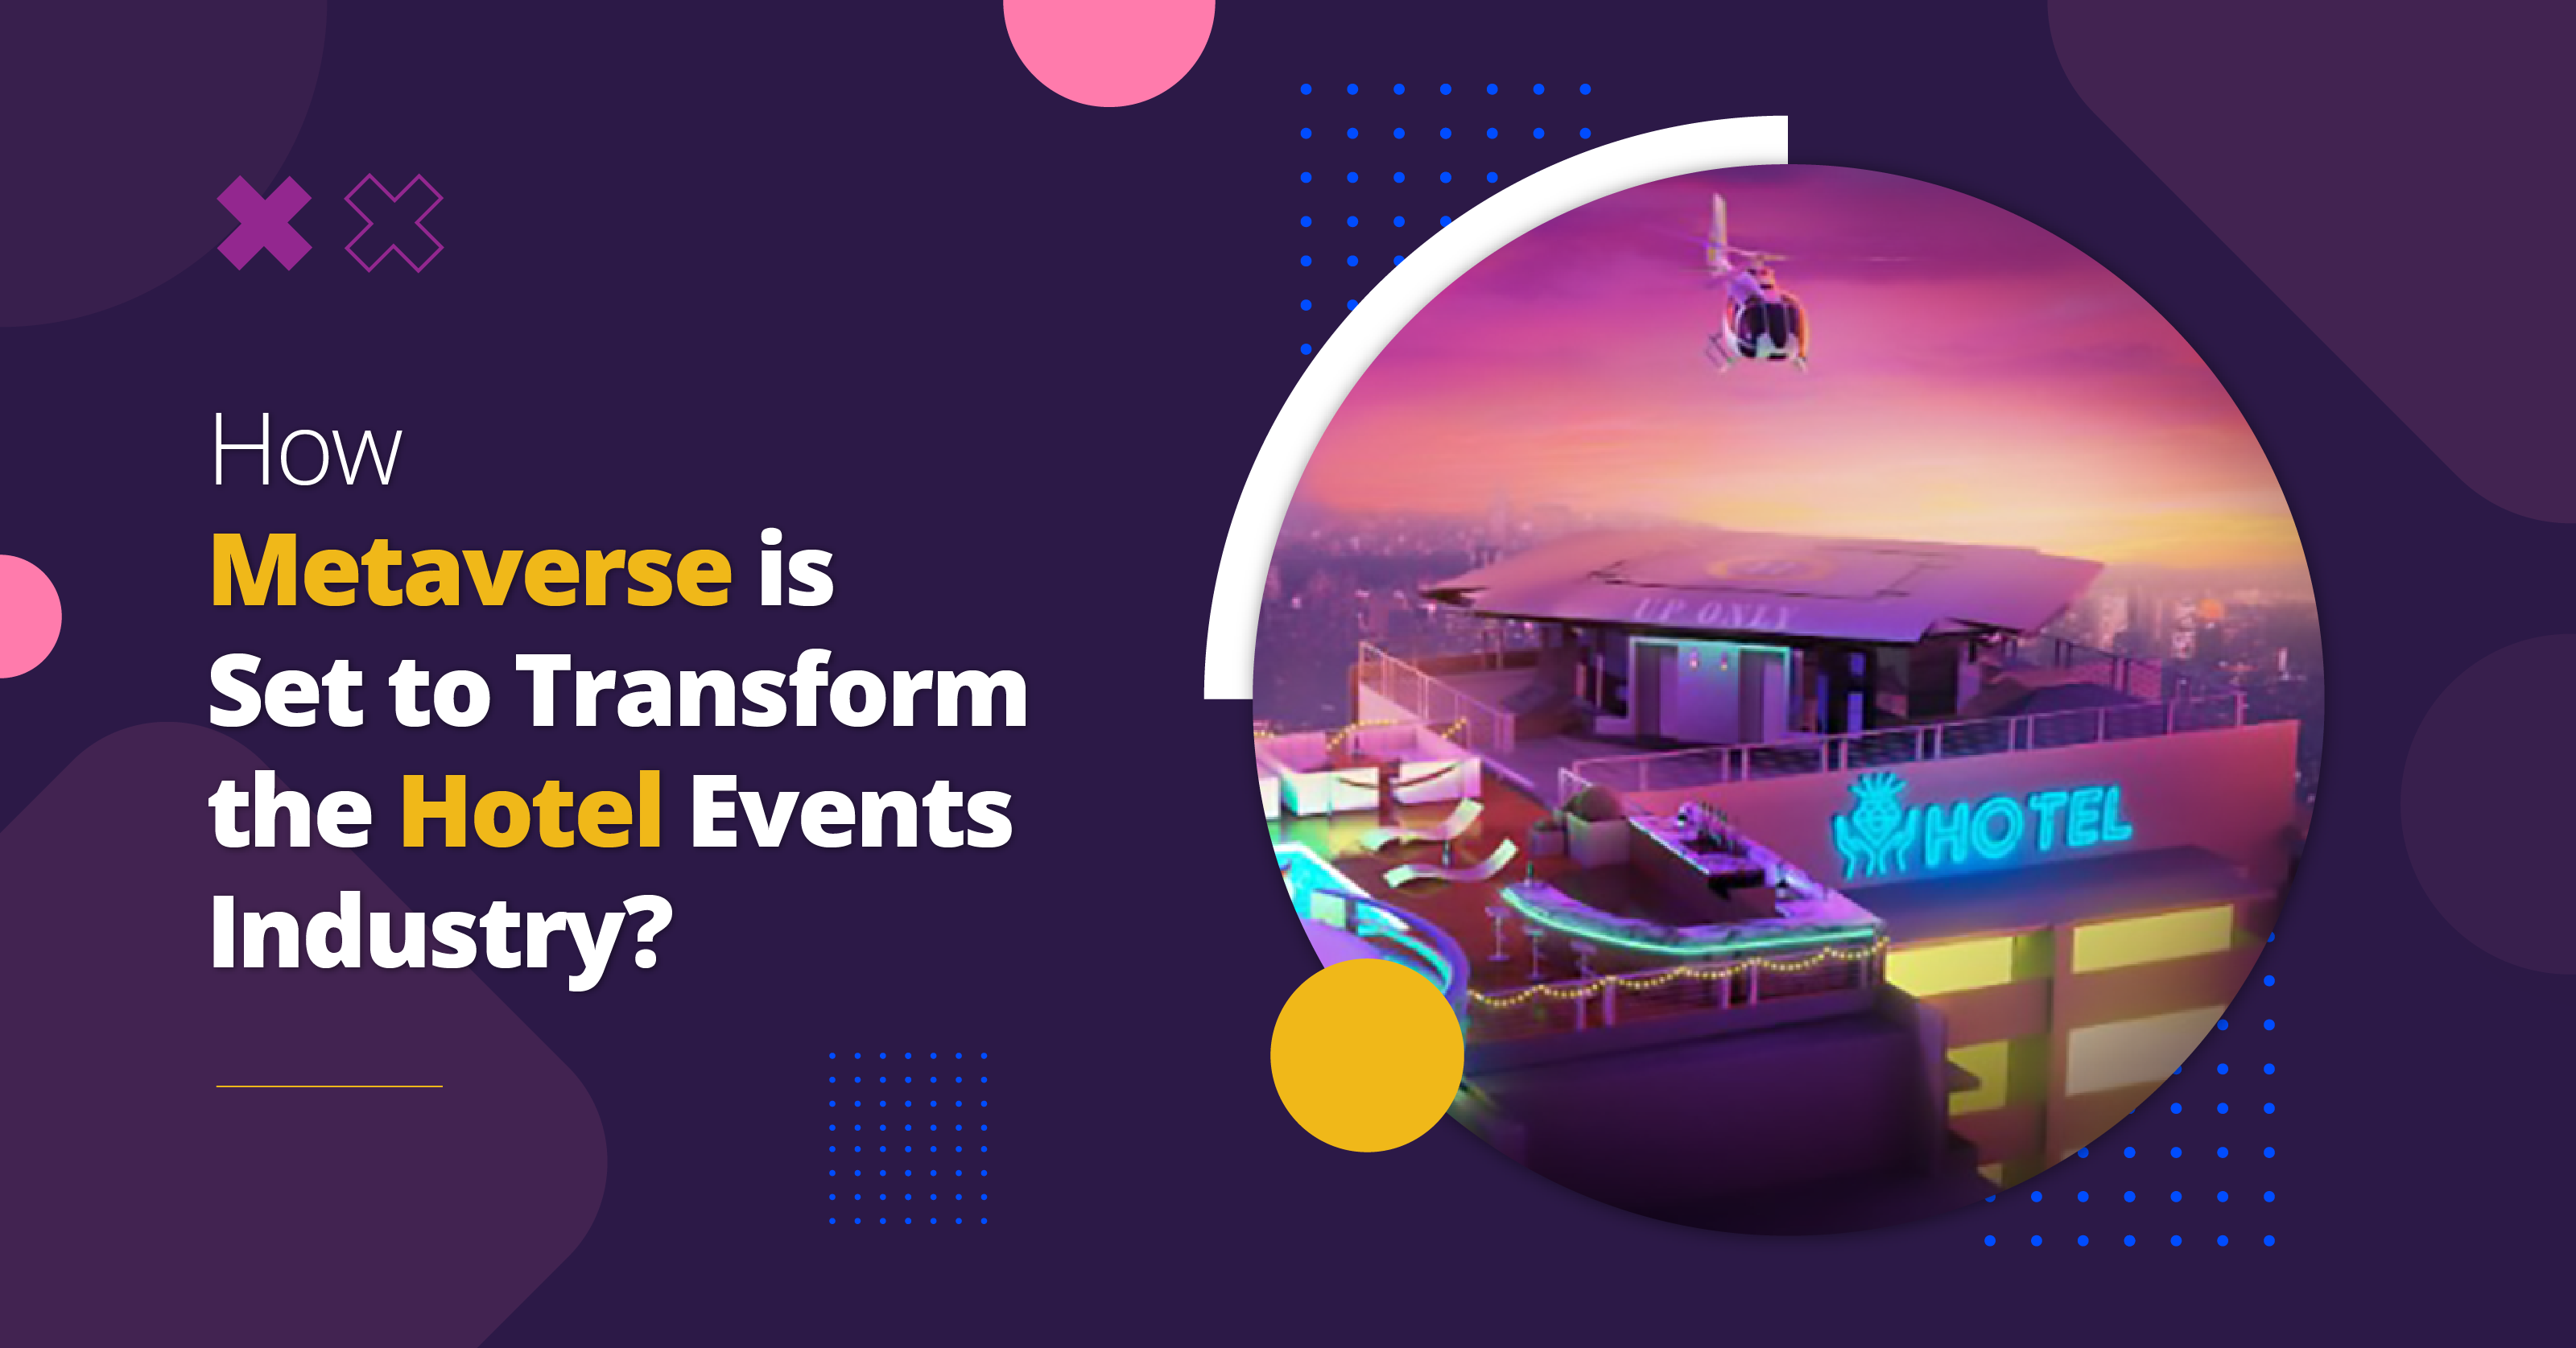 How
								Metaverse is set to transform the hotel events
								industry?